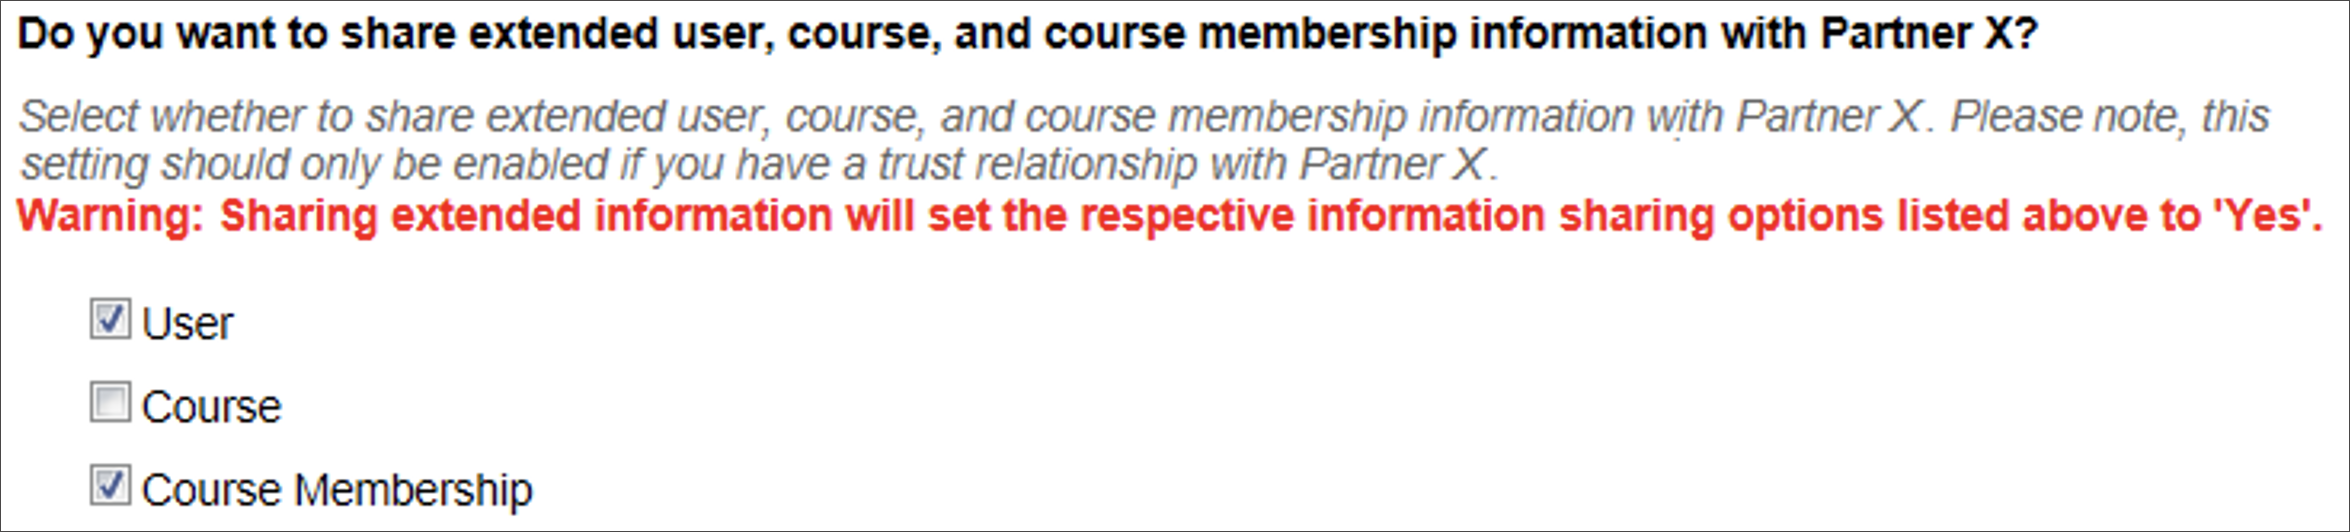 Set extended user and course information with a partner confirmation message